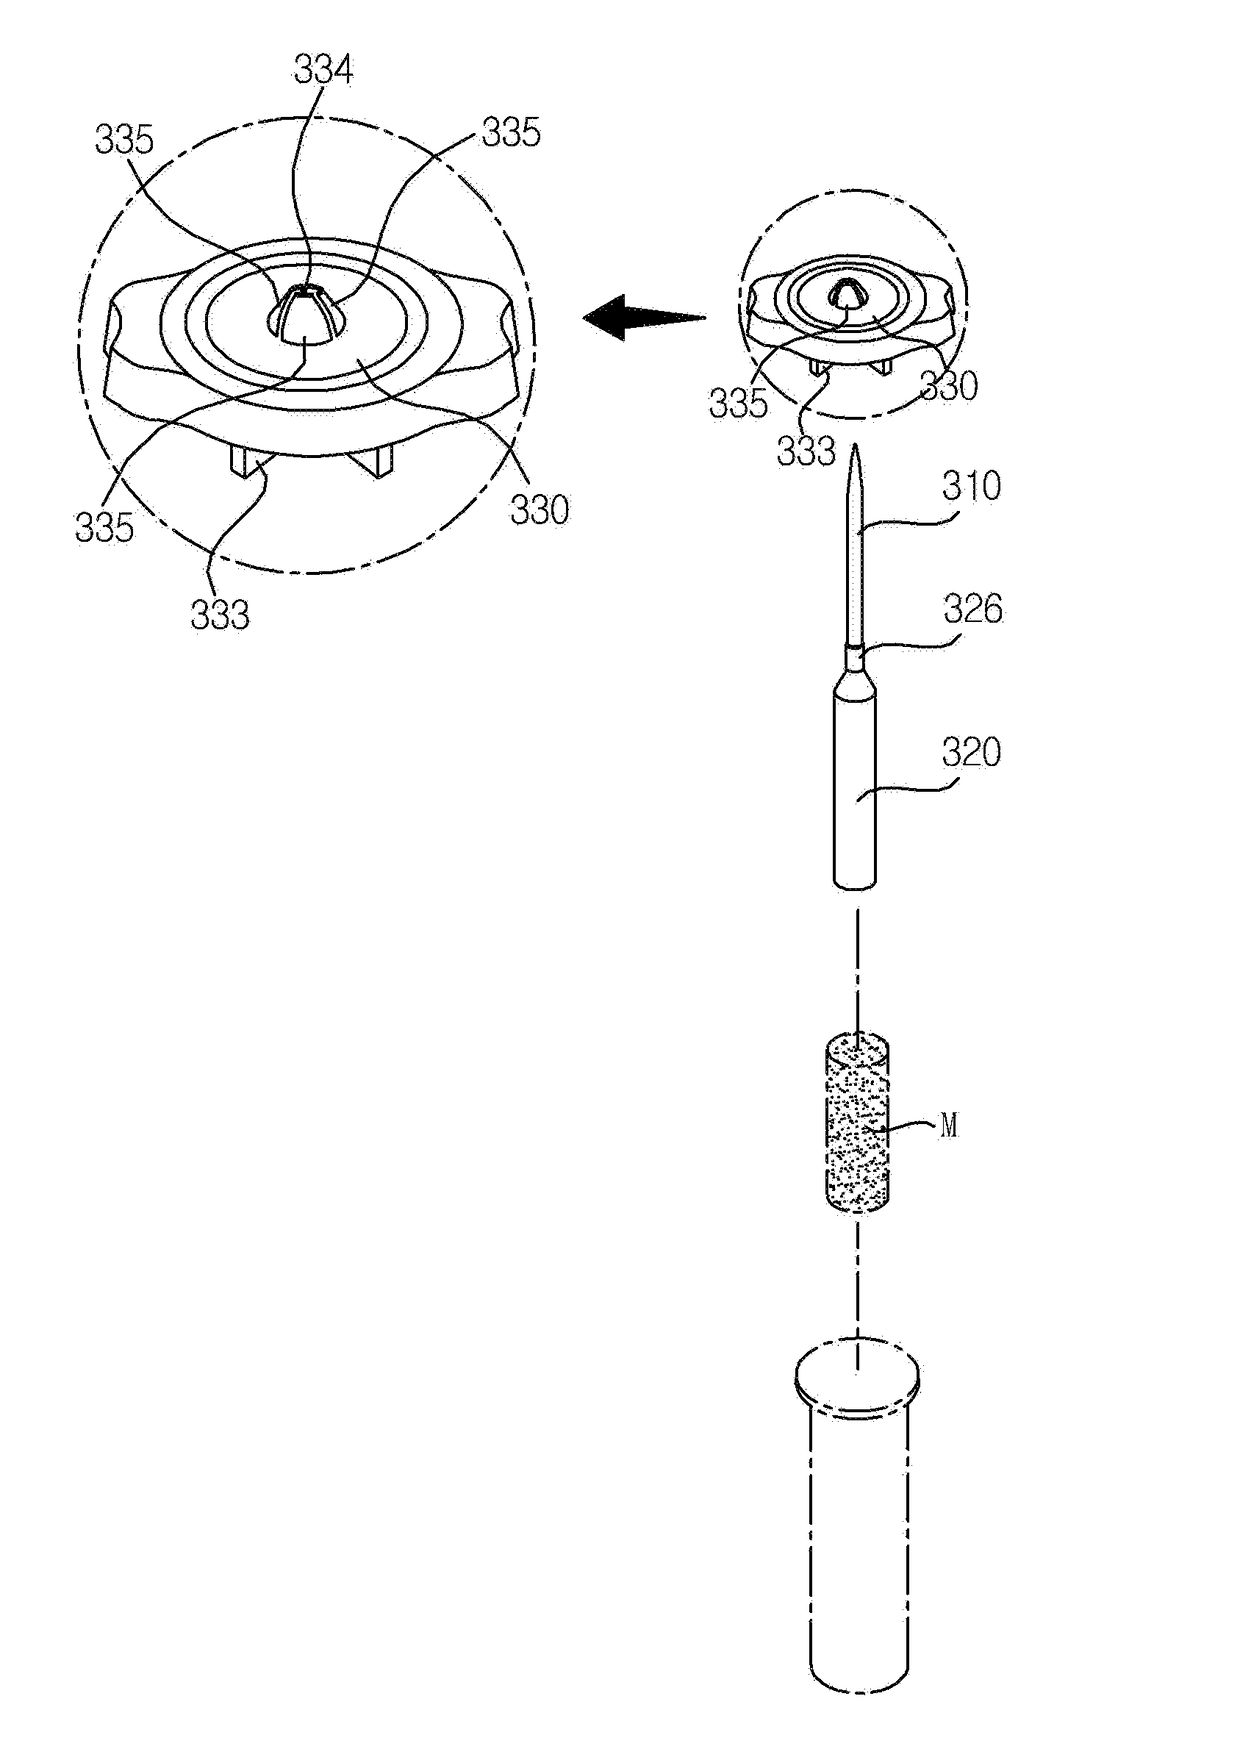 Cartridge for treating dental root and method for manufacturing needle for treating dental root